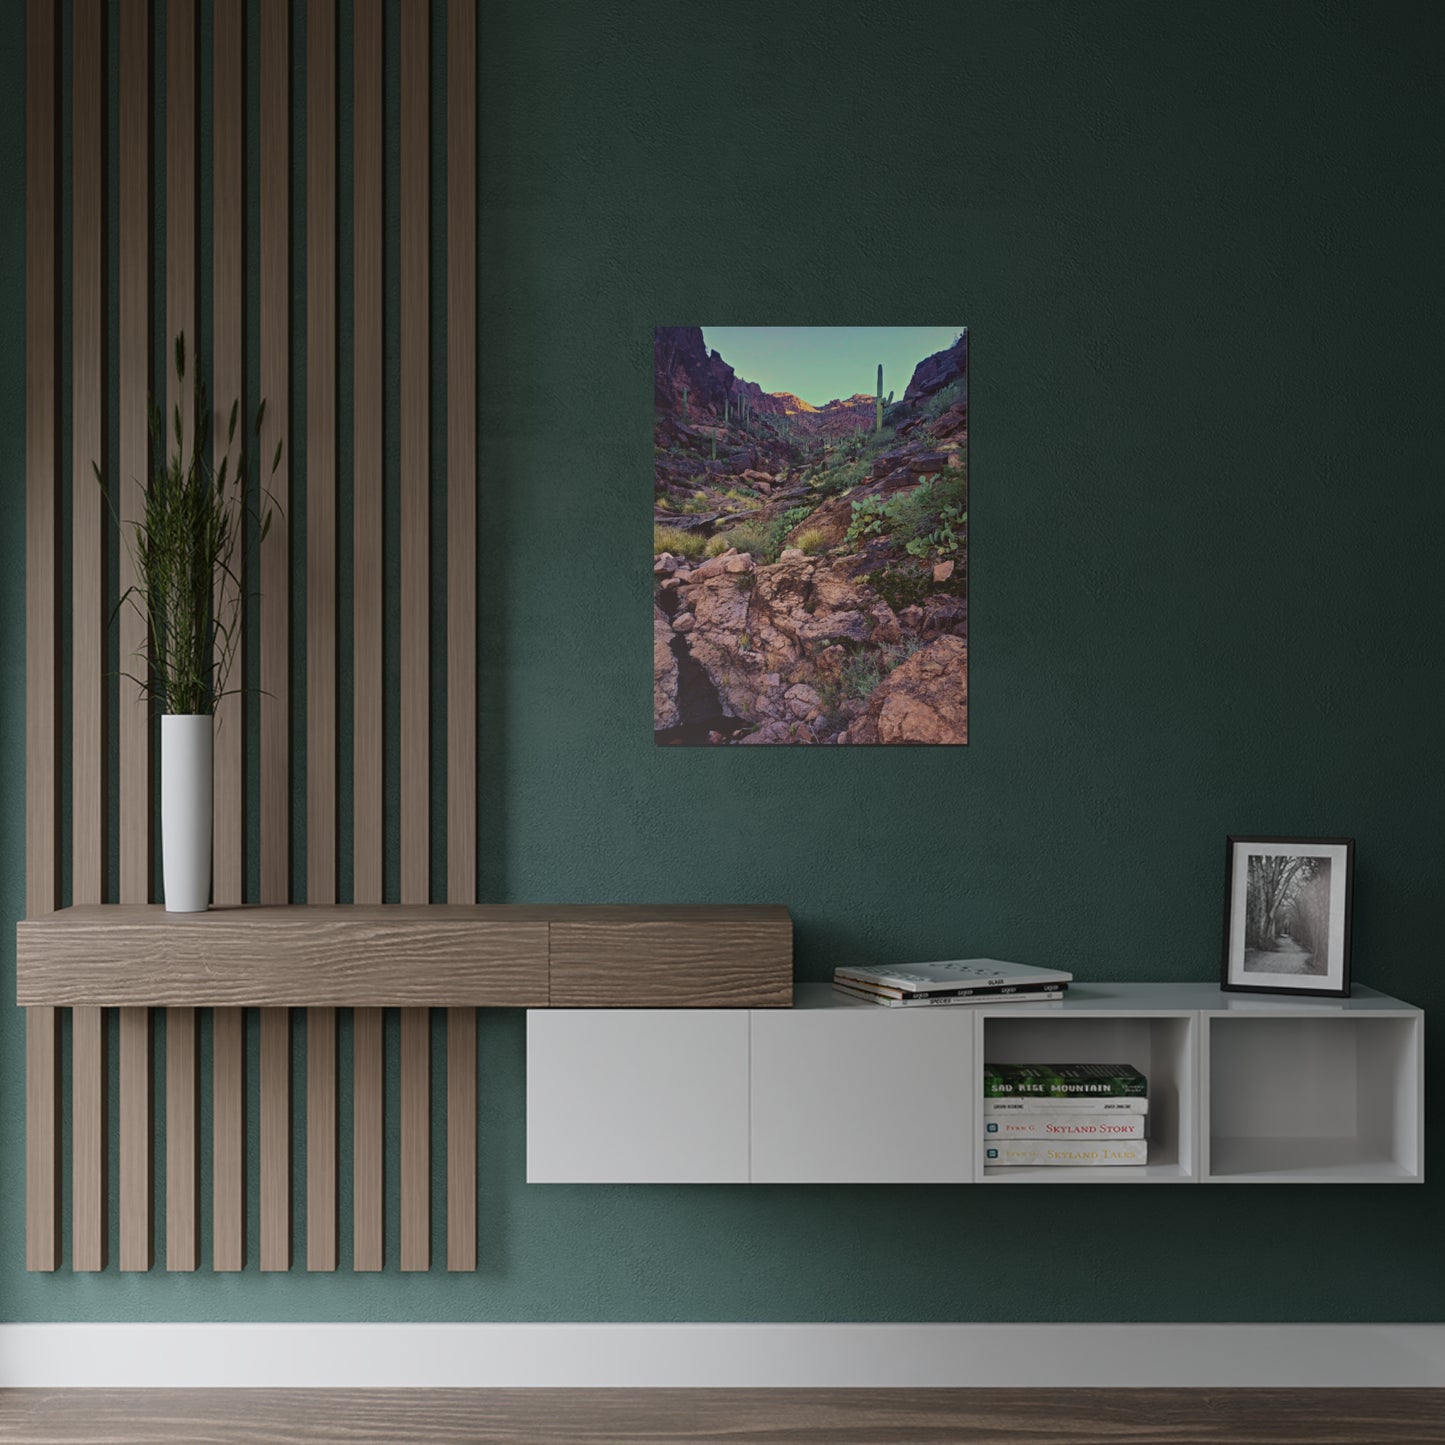 Arizona Poster Print: A View Up the Canyon; Arizona Photography, Wall Art, Natural Landscape Home Decor for Hikers and Nature Lovers!